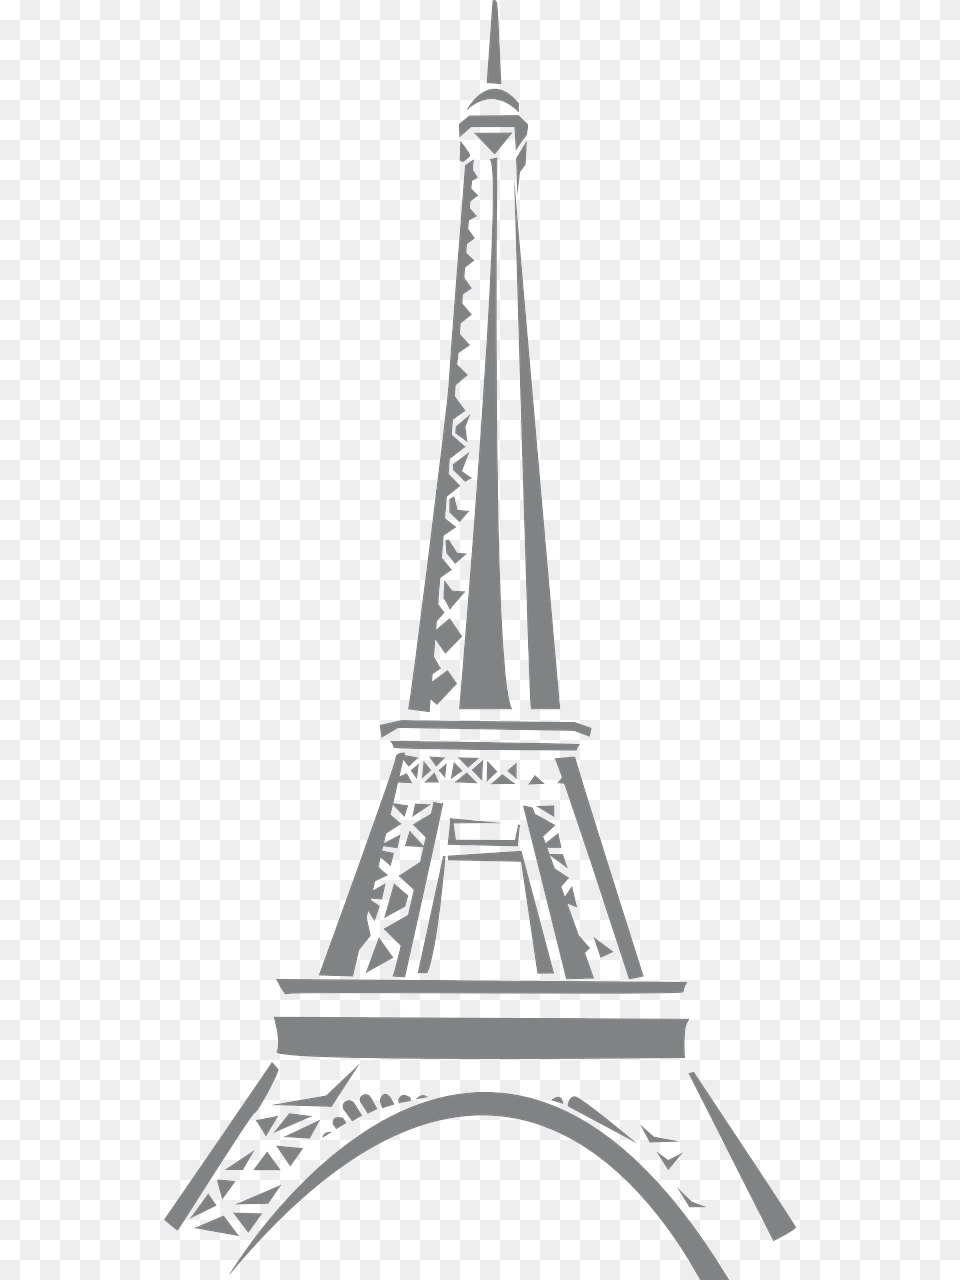 Download France Eiffel Tower High Symbol Eiffel Tower Cartoon, Architecture, Building, Spire Free Transparent Png